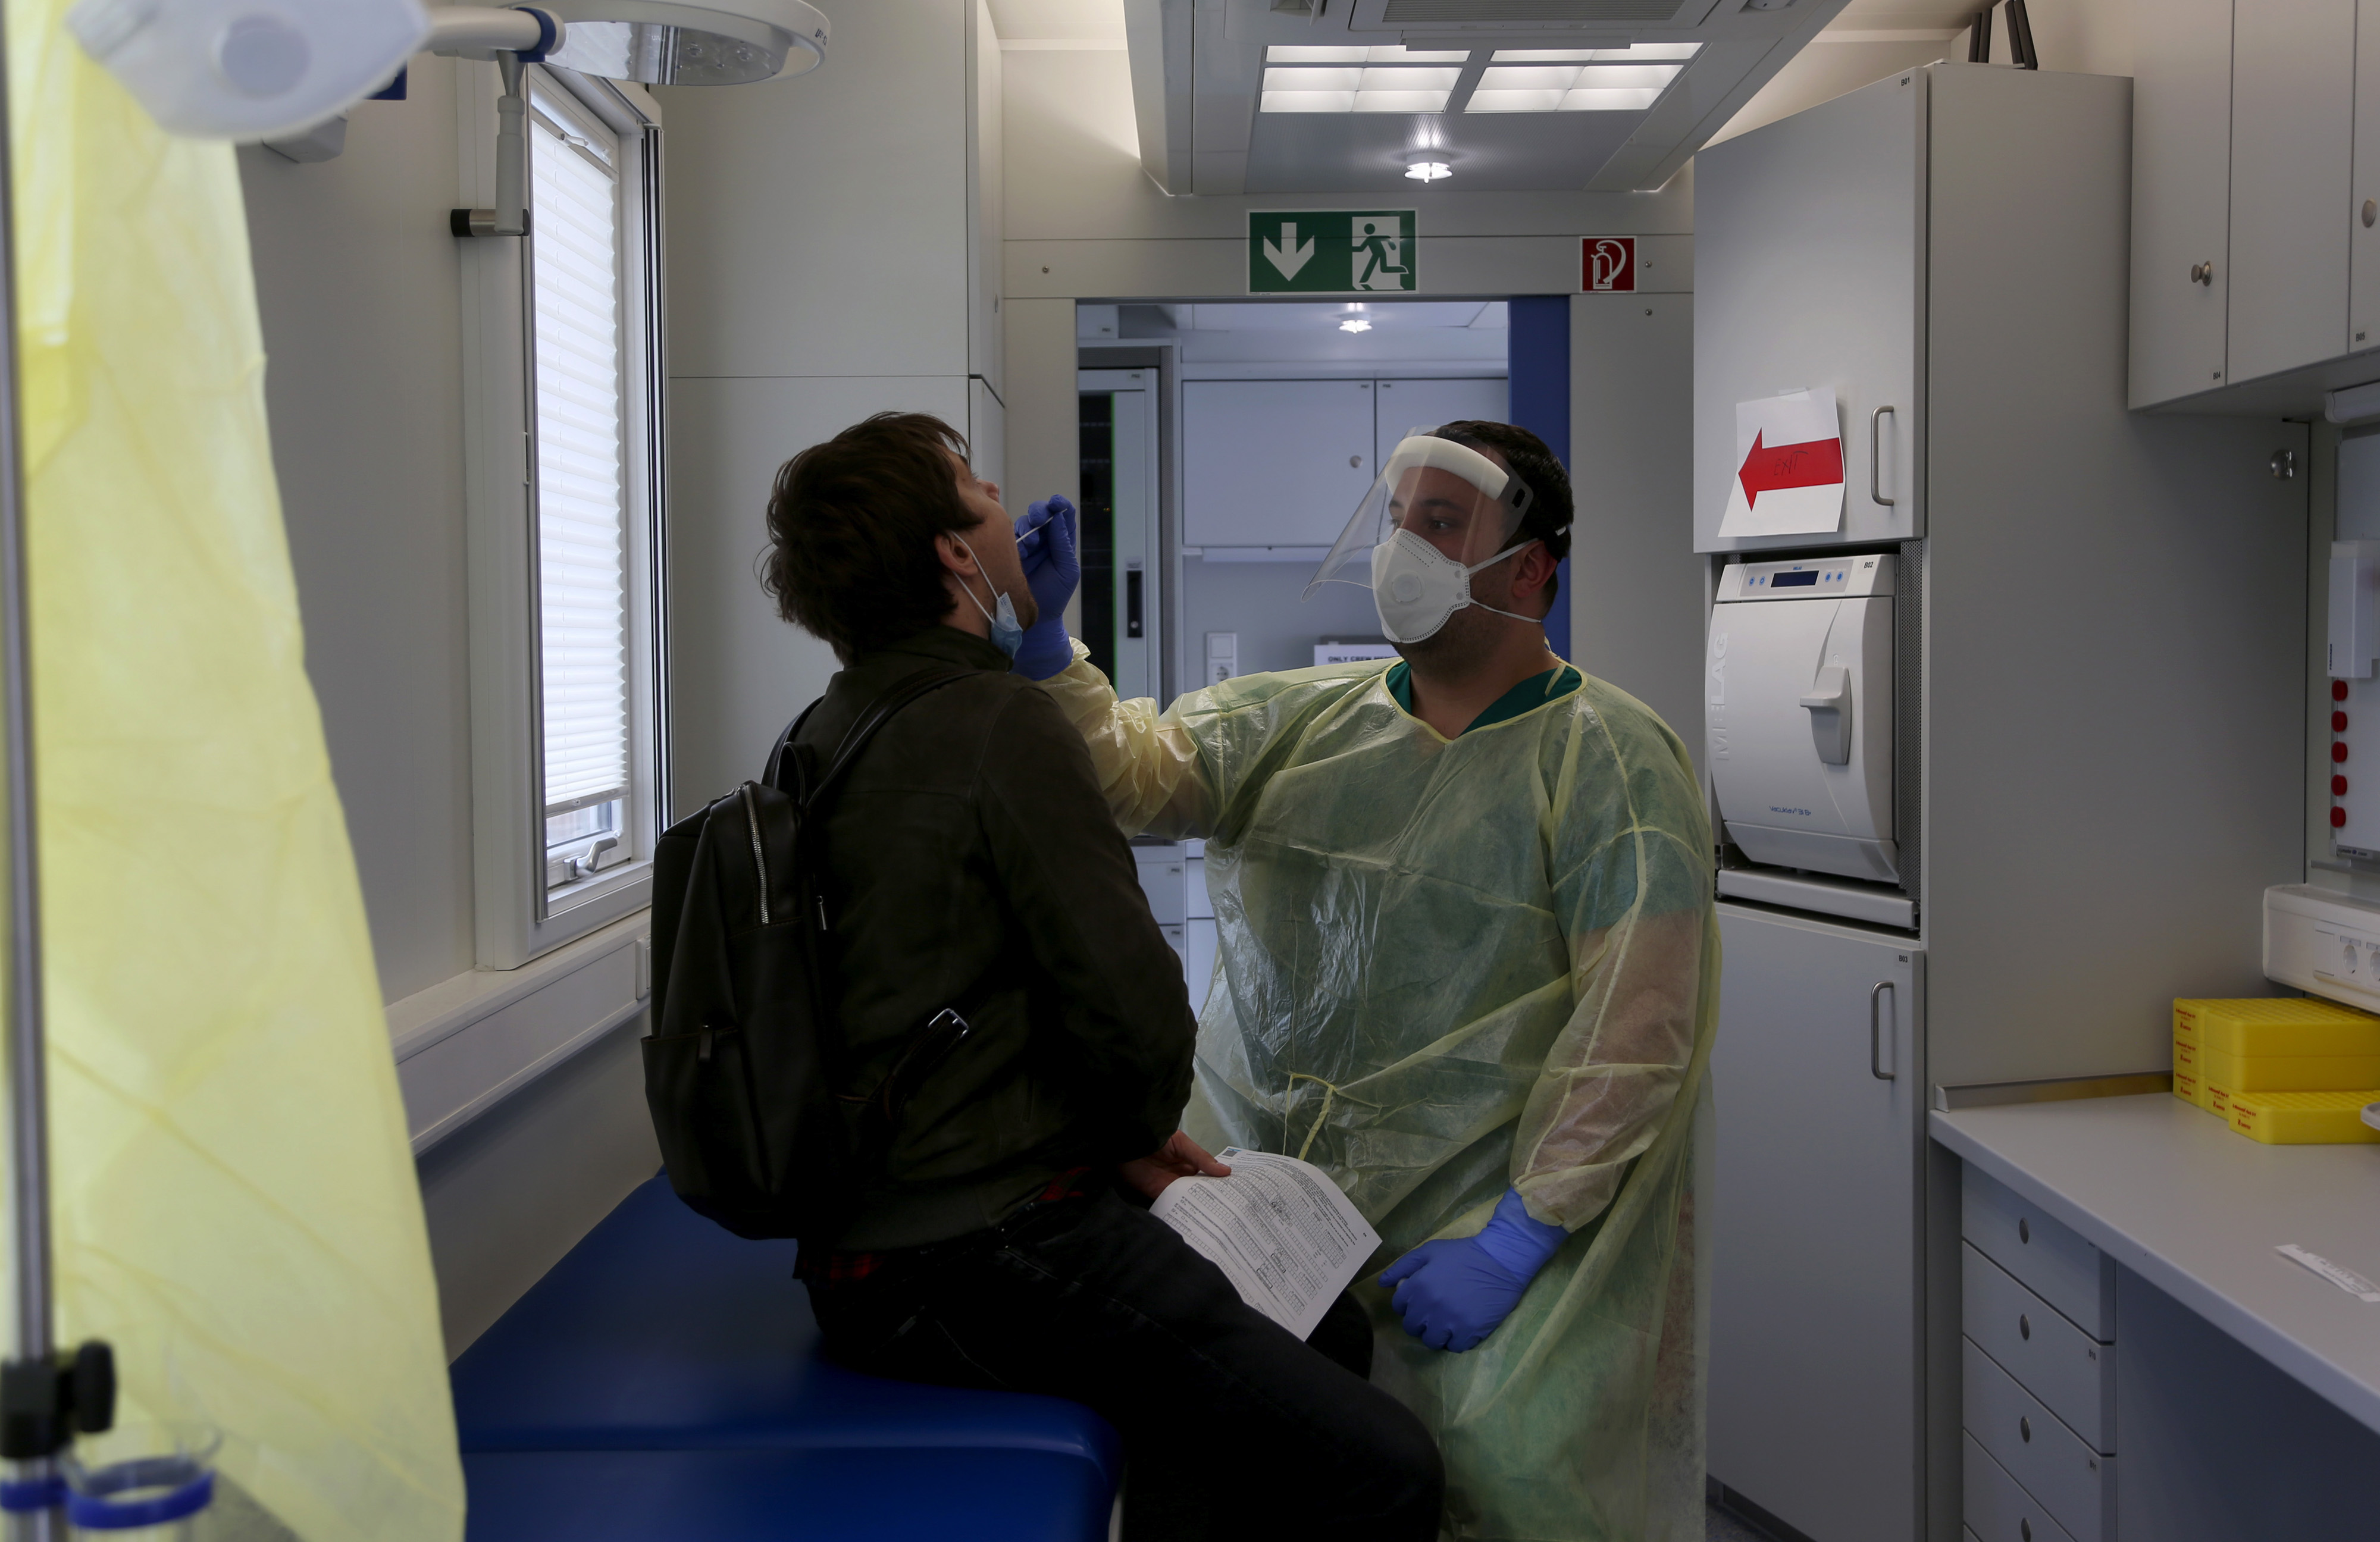 A health worker administers a Covid-19 swab test on a traveler after arriving on a coach in Berlin, Oct. 12.